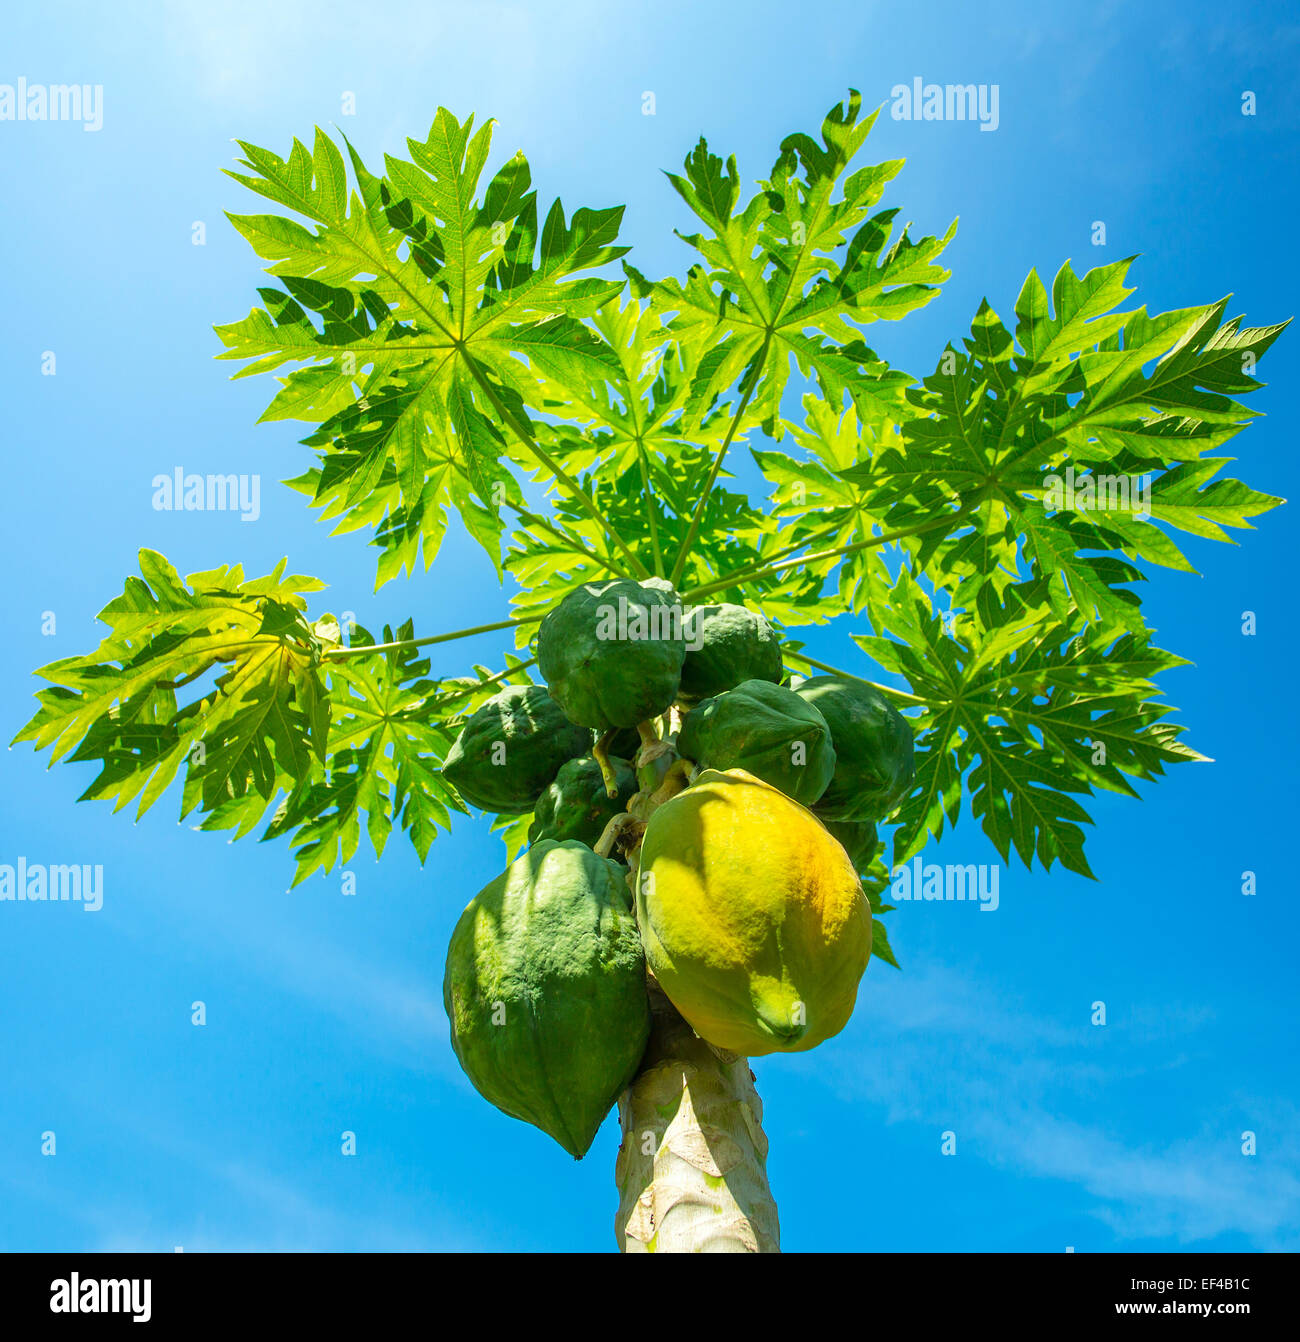 Green and yellow papayas growing on a tree Stock Photo